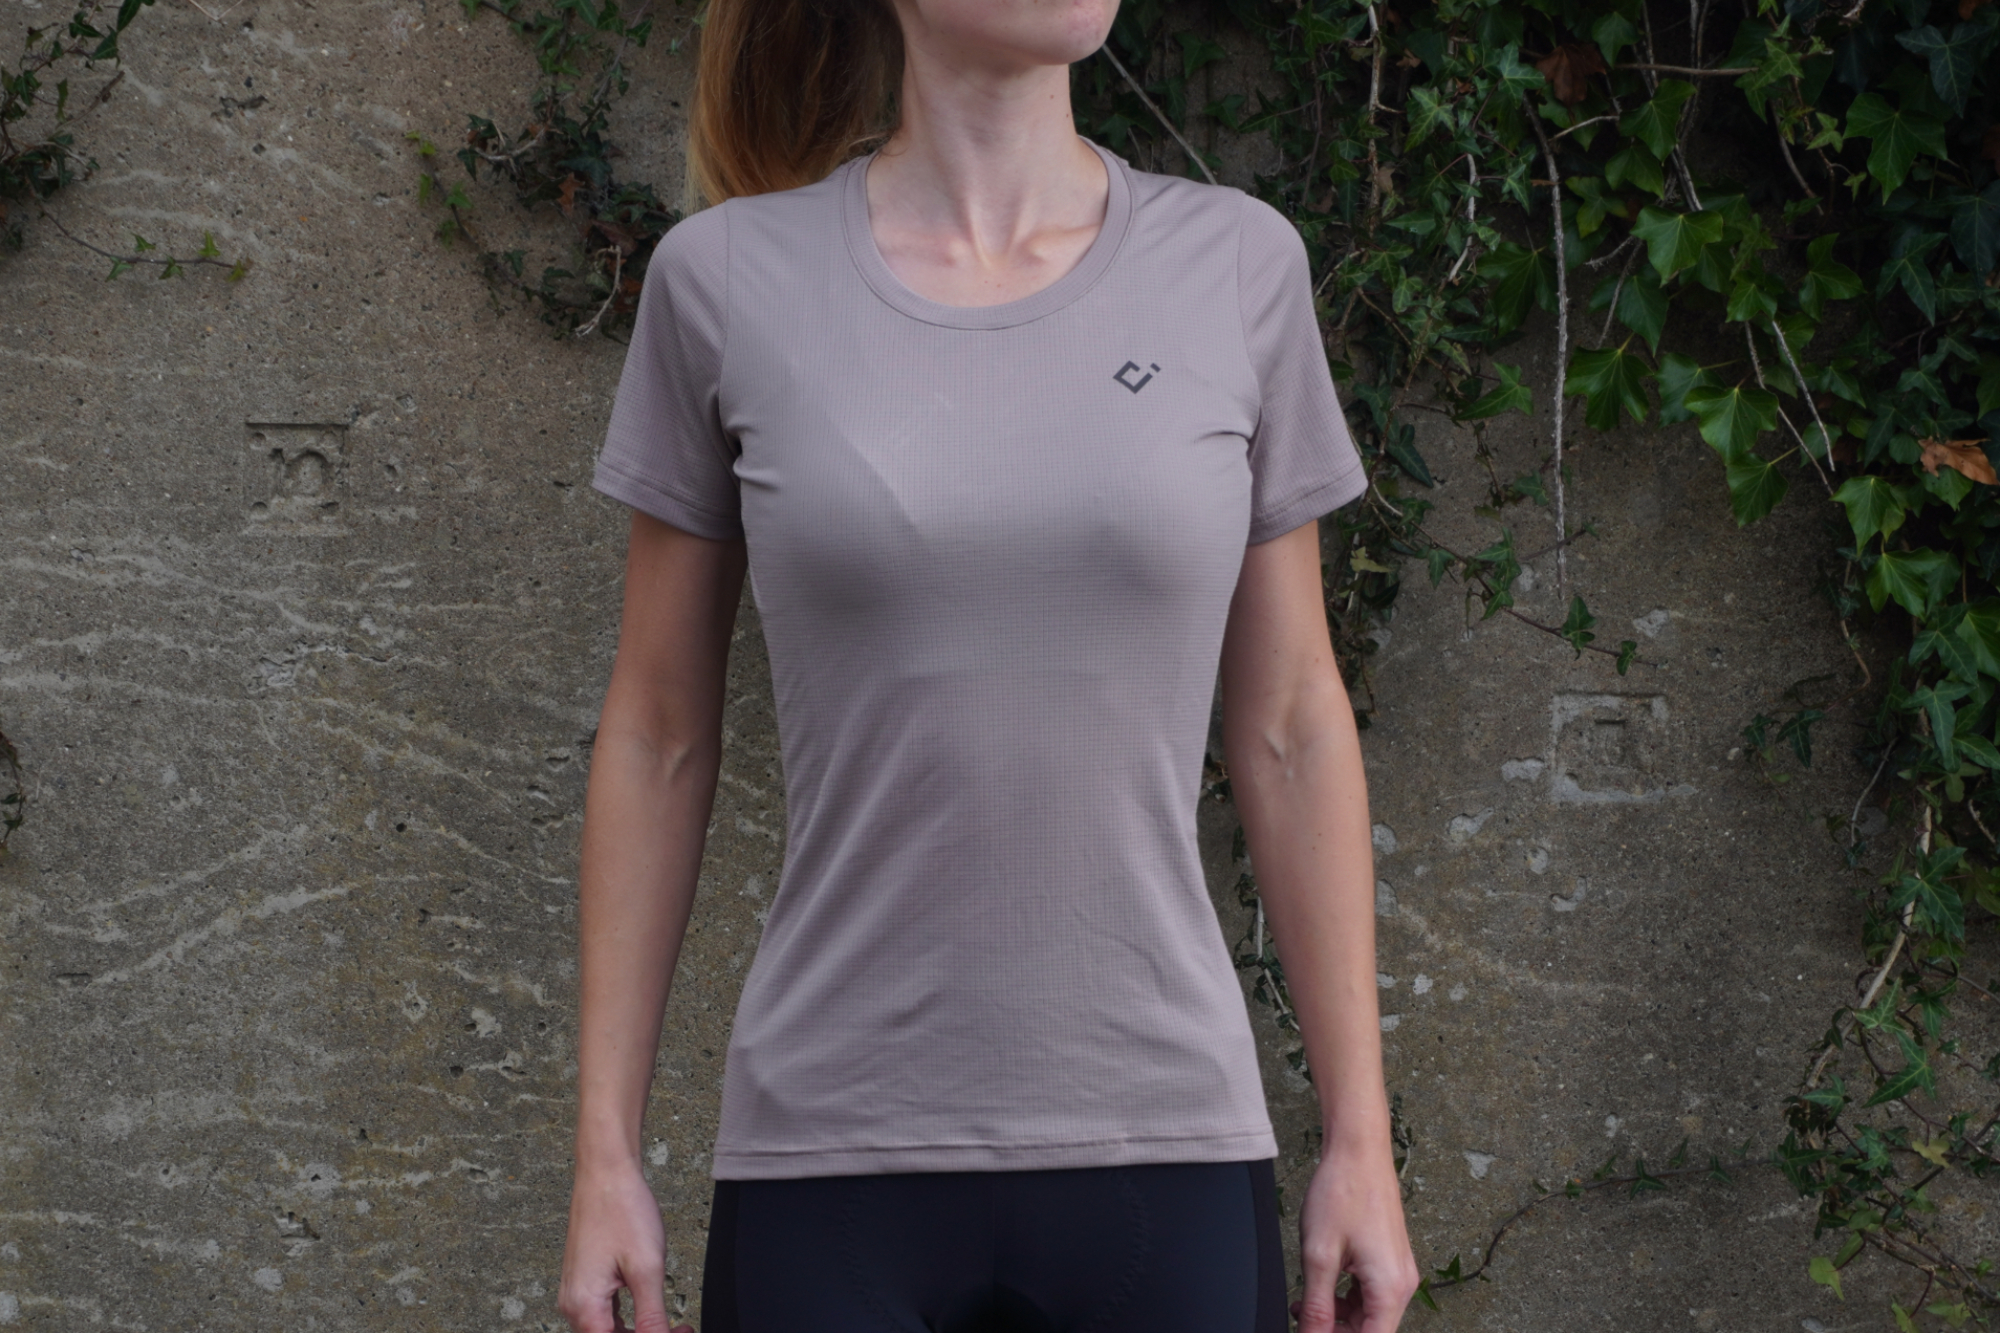 Anna Abram wearing the Velocio Women's Delta Tee, which is among the best women's gravel cycling clothing